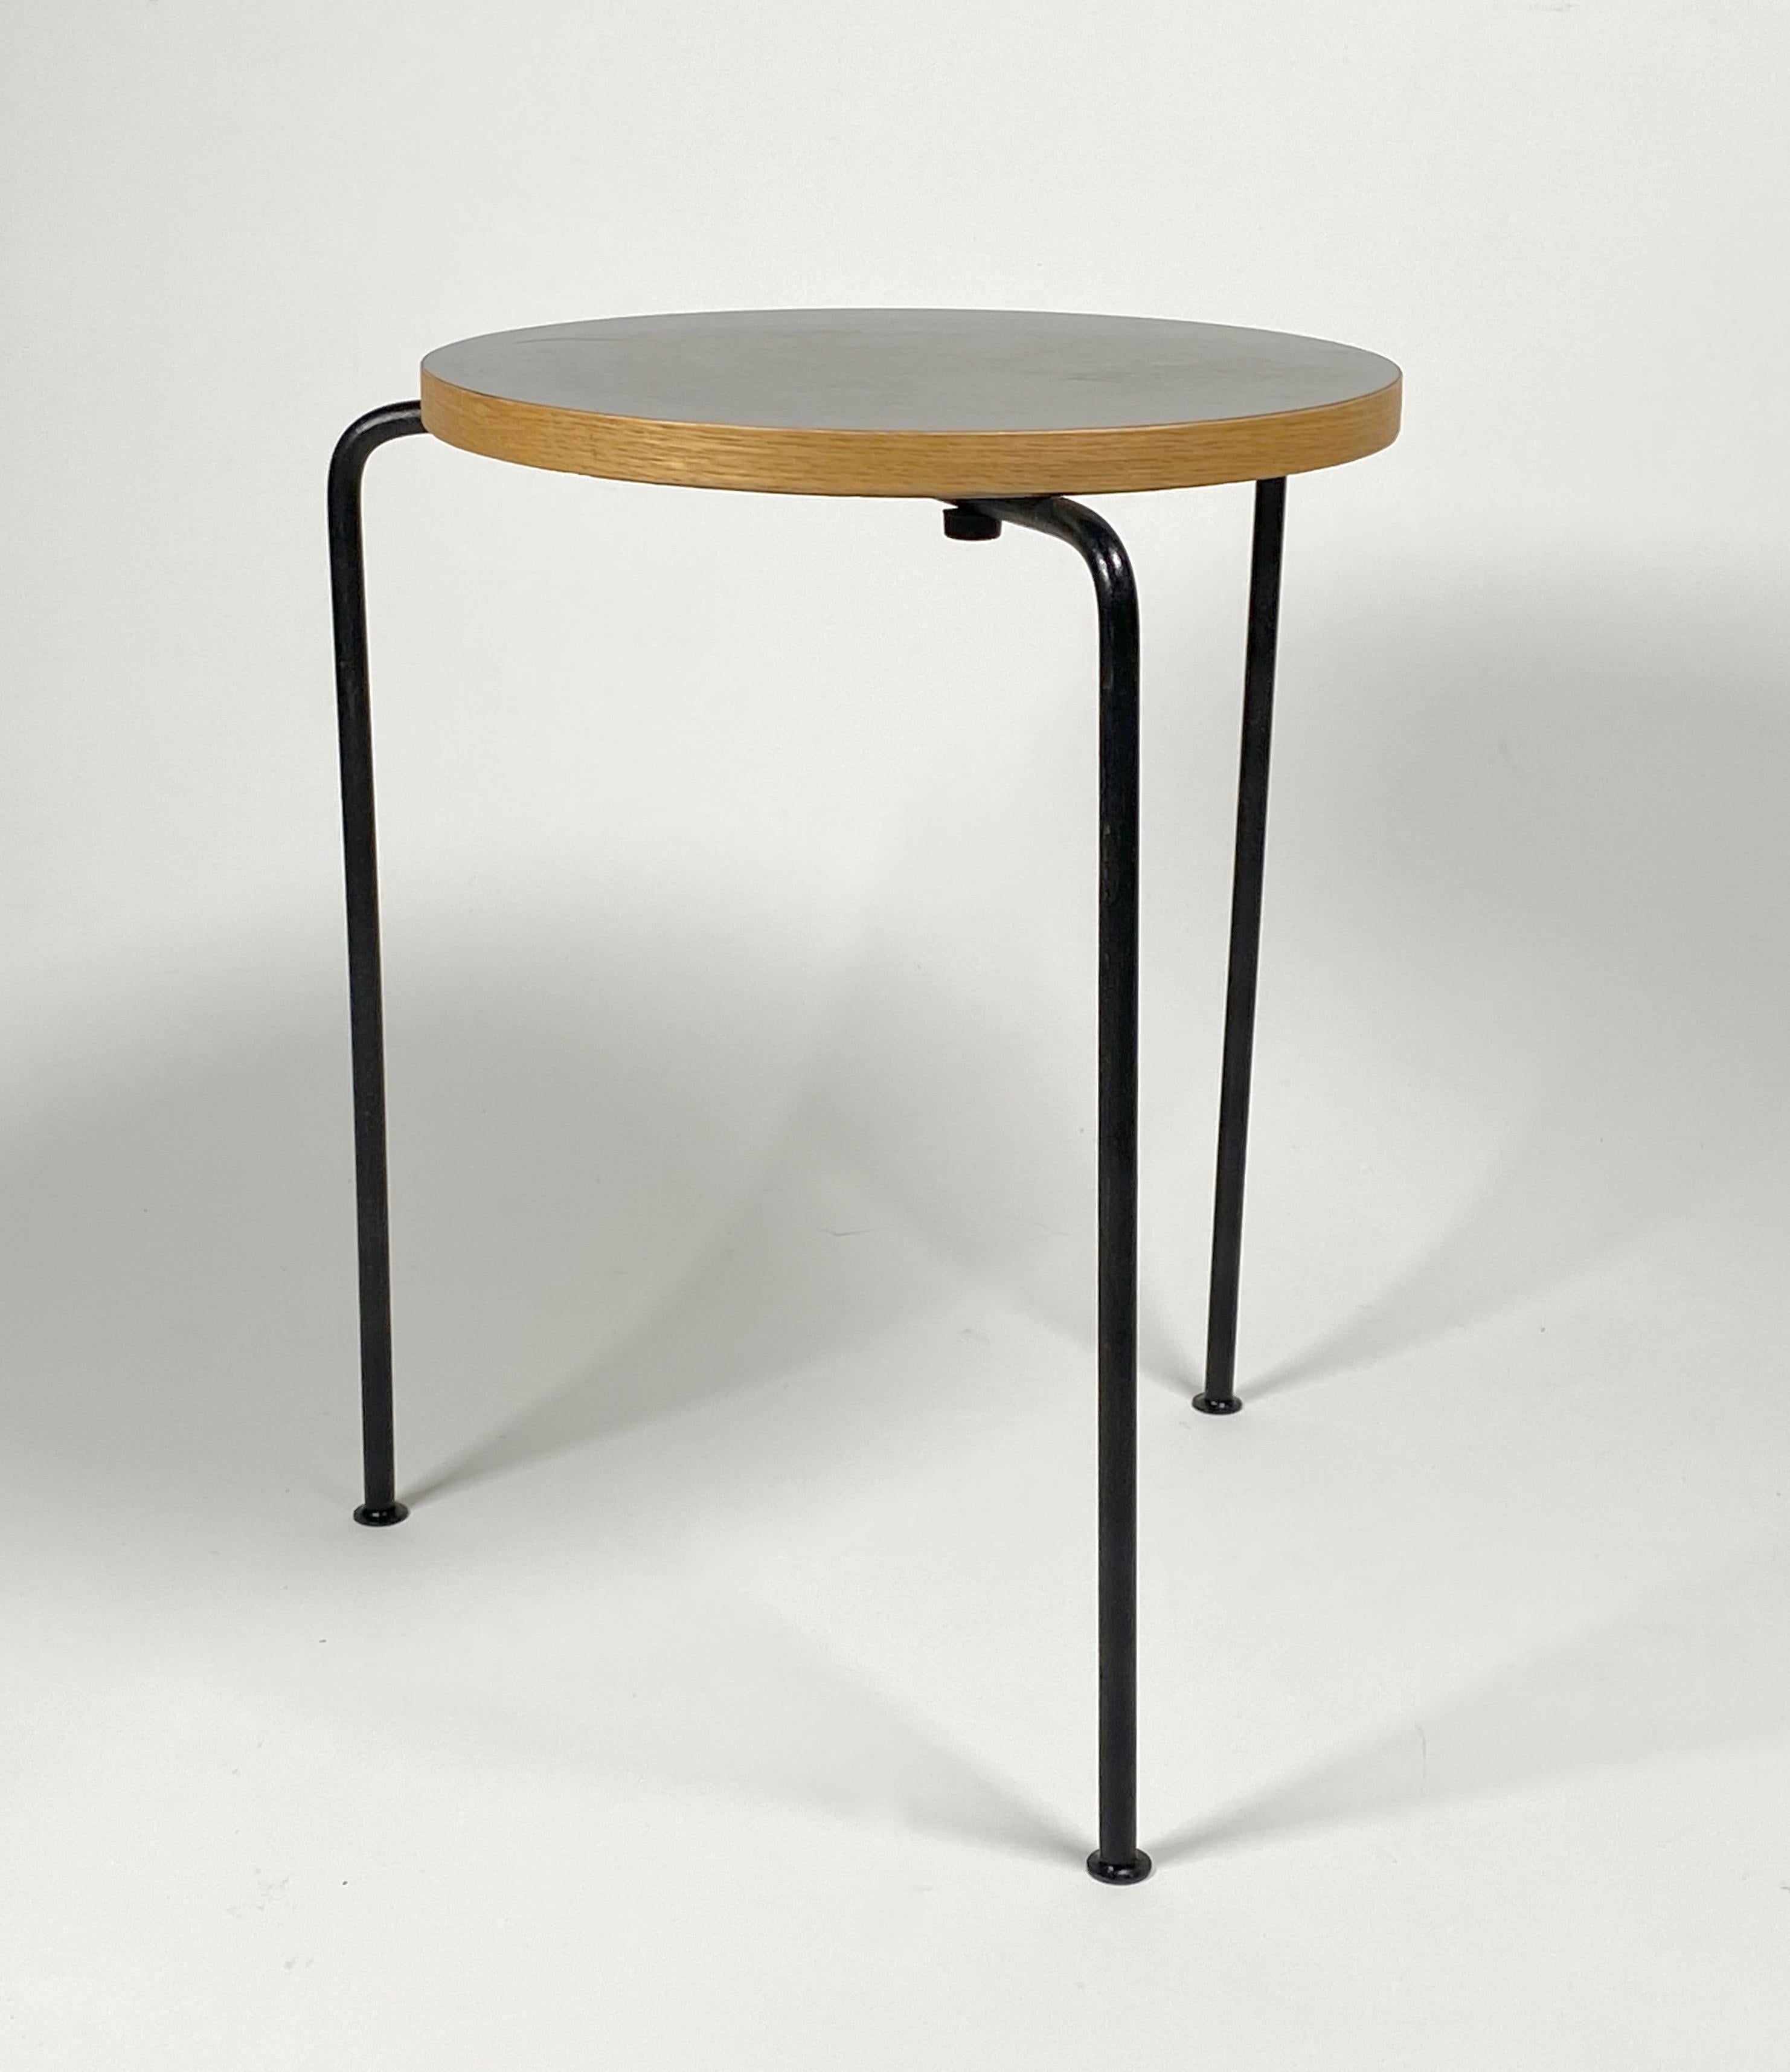 American California Modernist Design Stool Attributed to Bay Area Designer Luther Conover